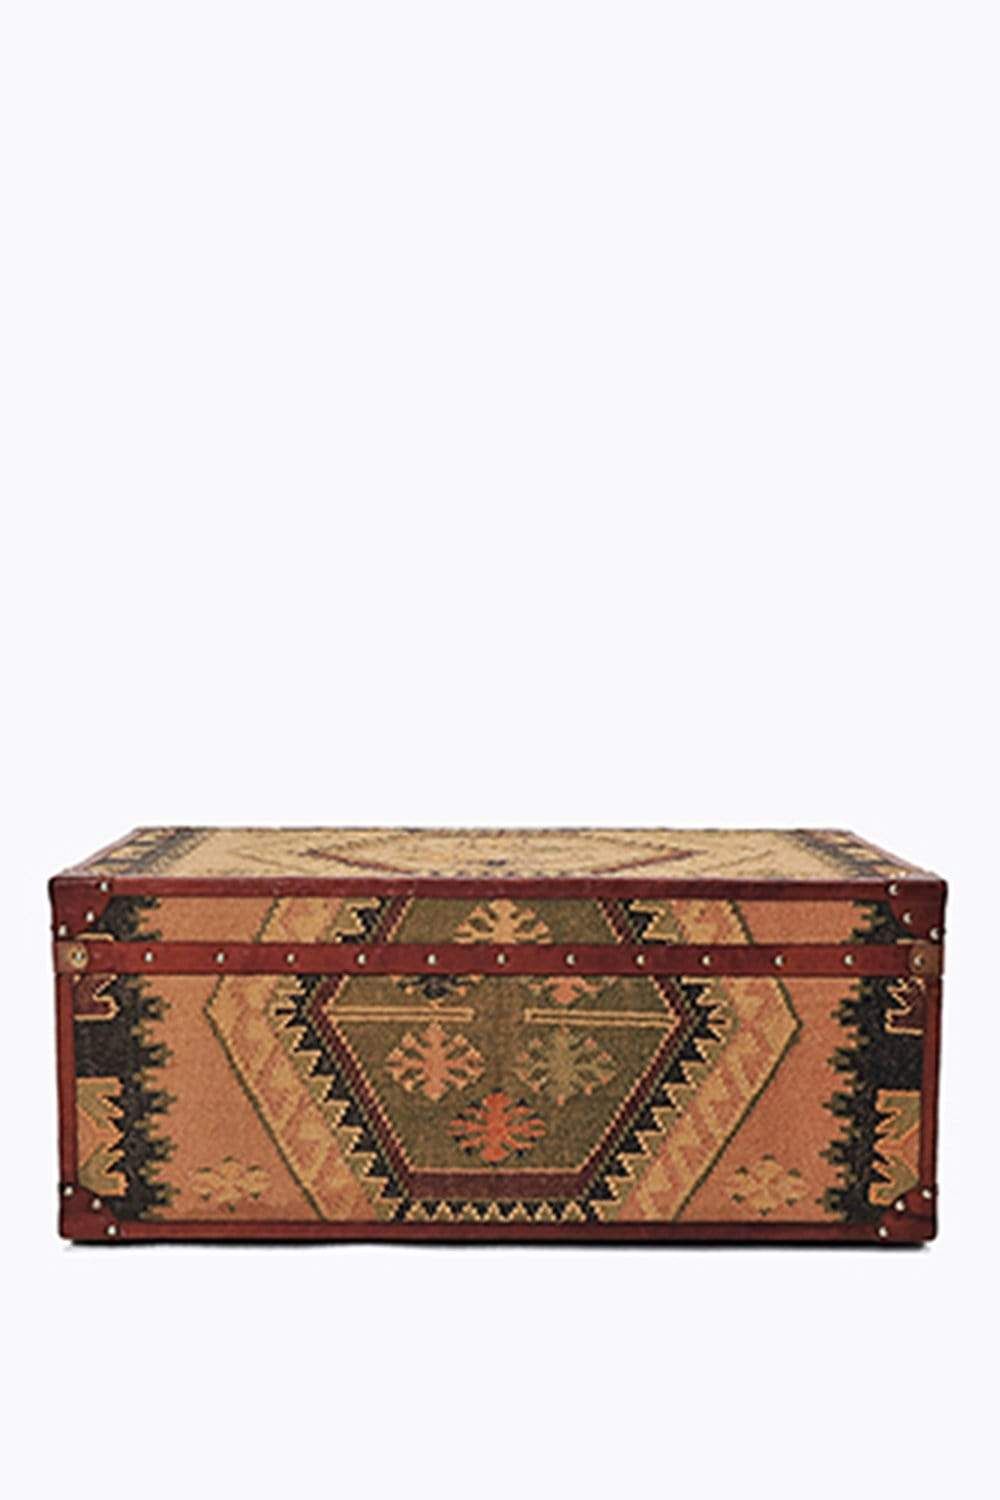 SEASON KILIM TRUNK/TABLE WITH LEATHER